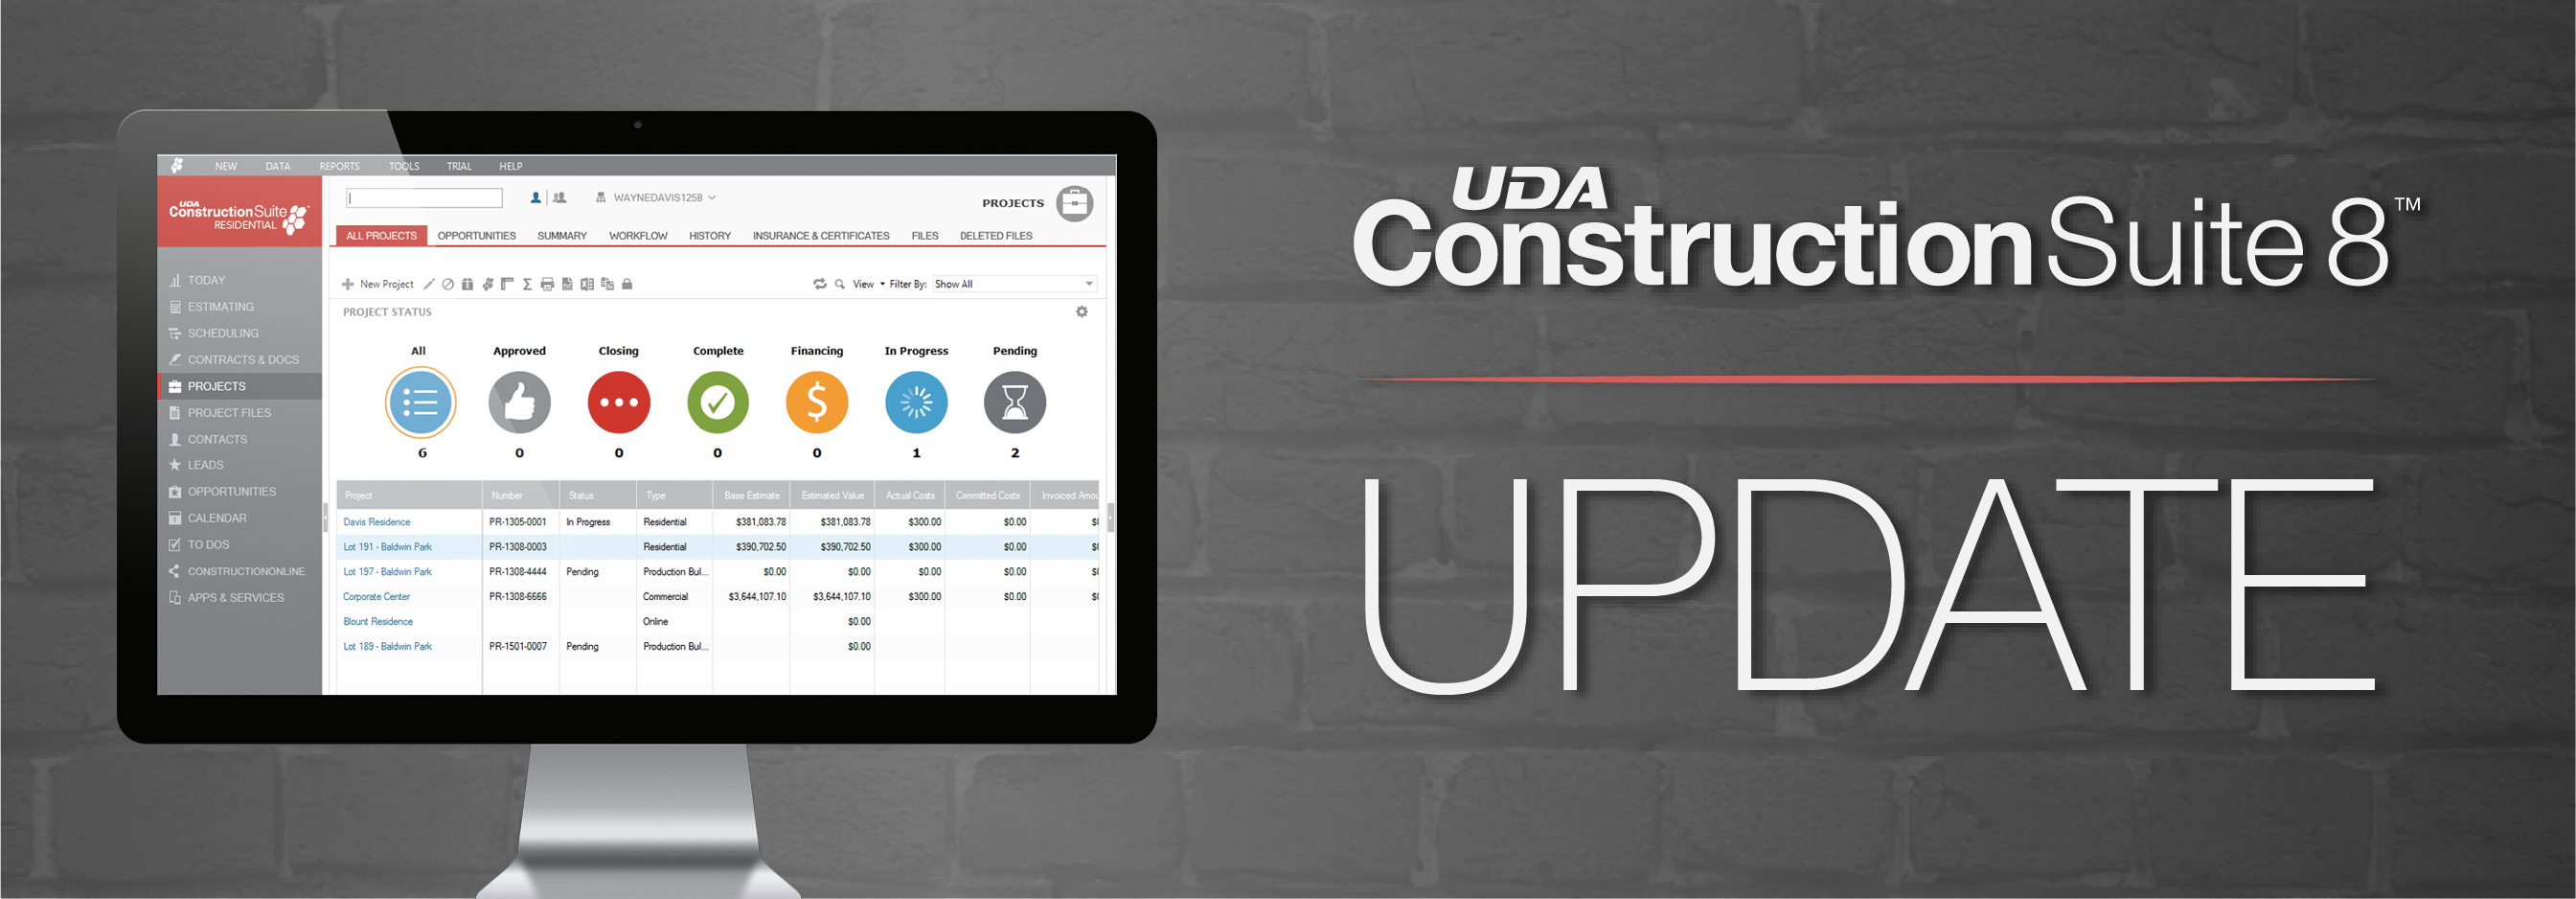 ConstructionSuite 8 Update Brings New Features and Enhancements